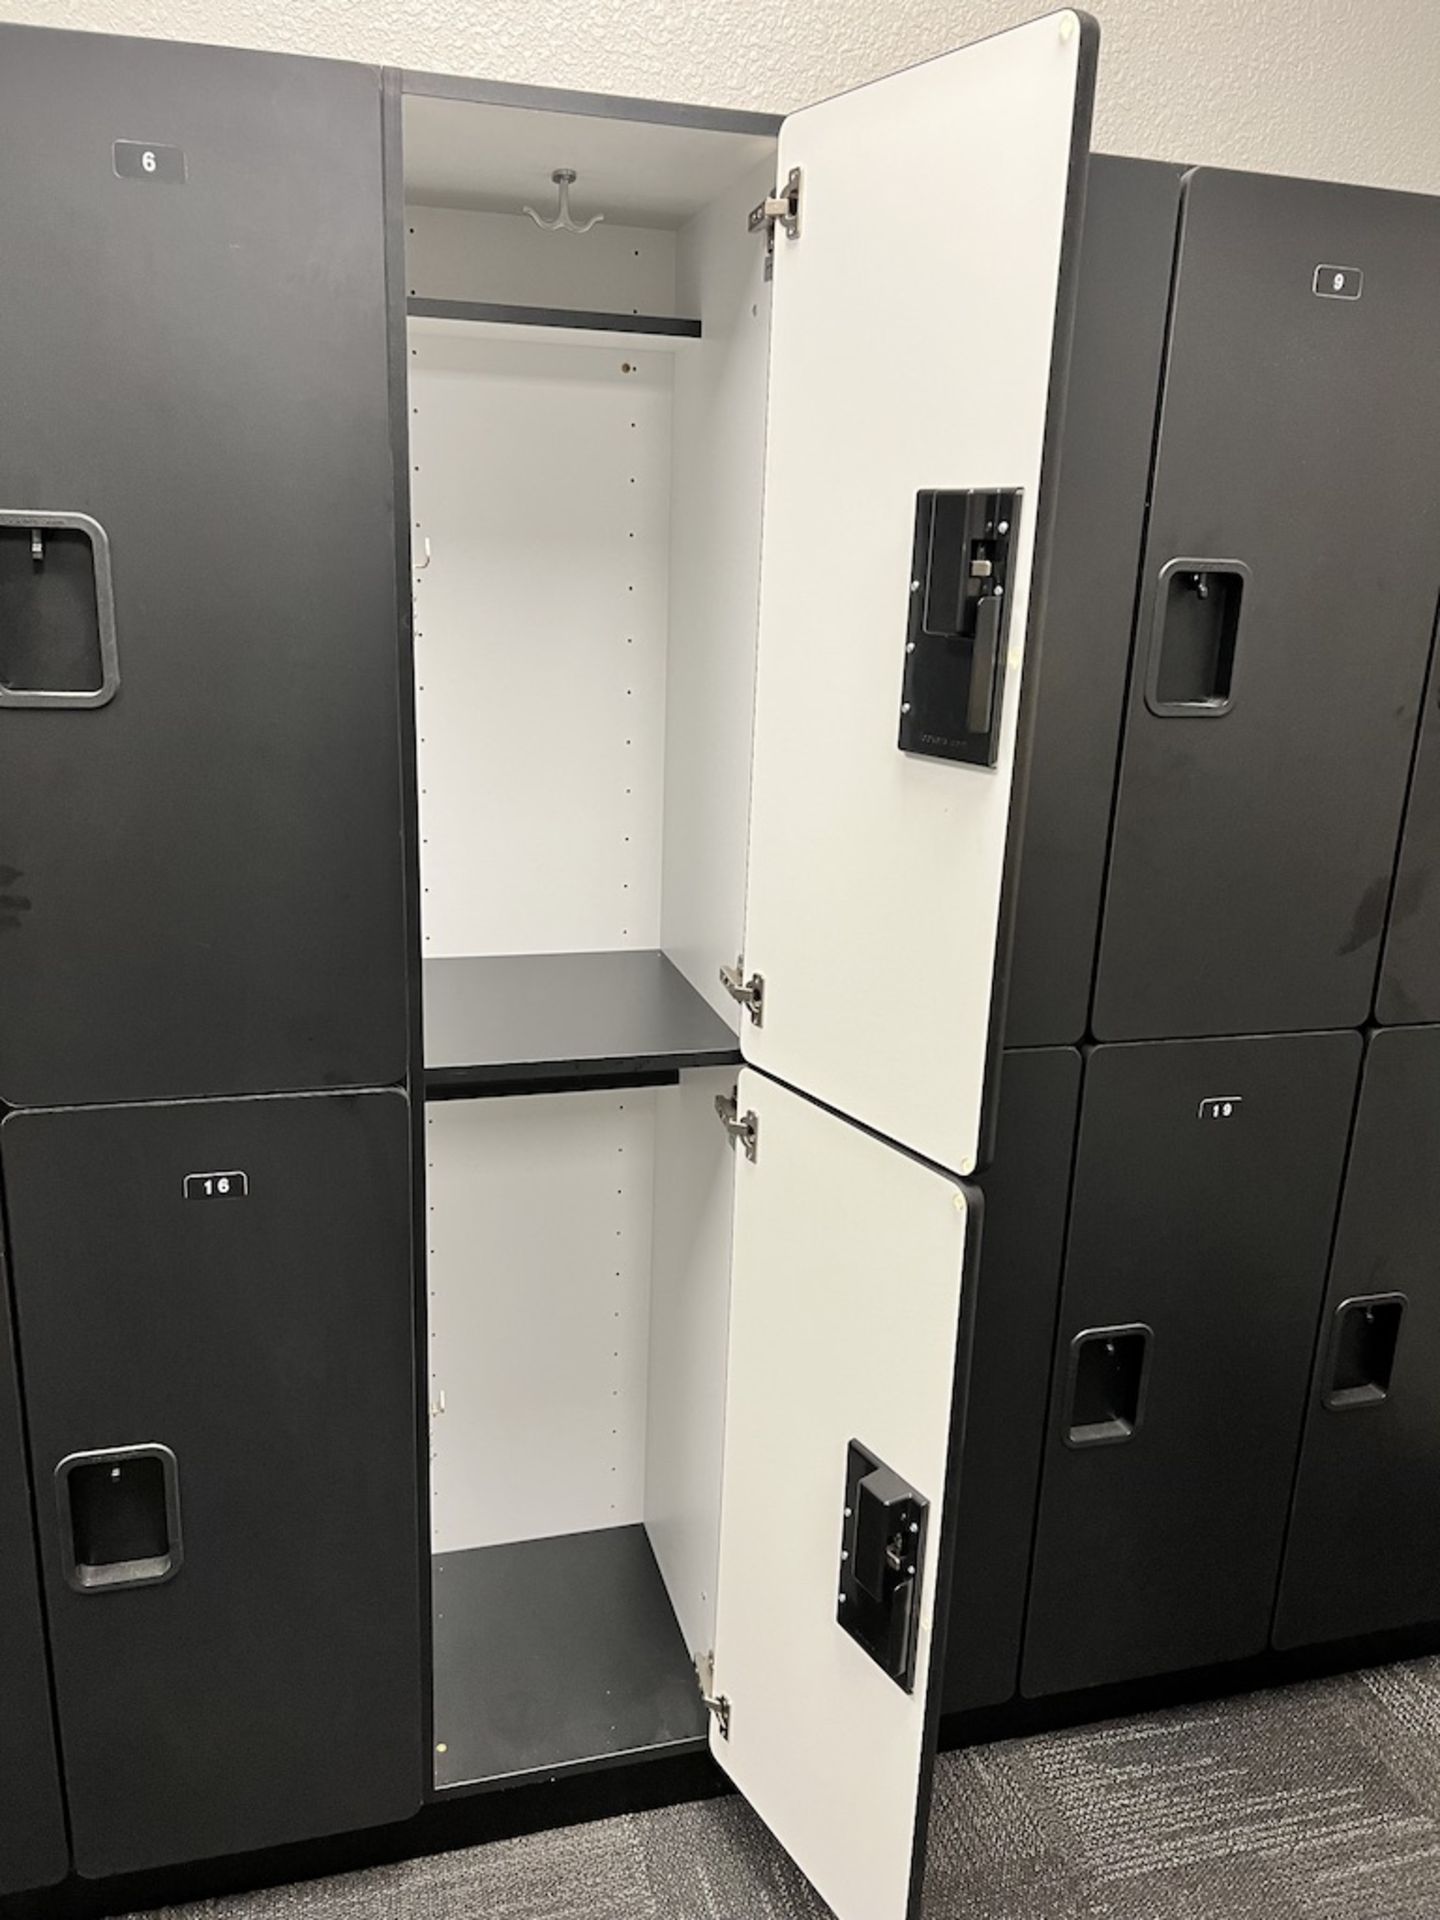 LOT OF: (4) 2 COMPARTMENT (VERTICAL) LOCKERS (BLACK) - Image 3 of 4